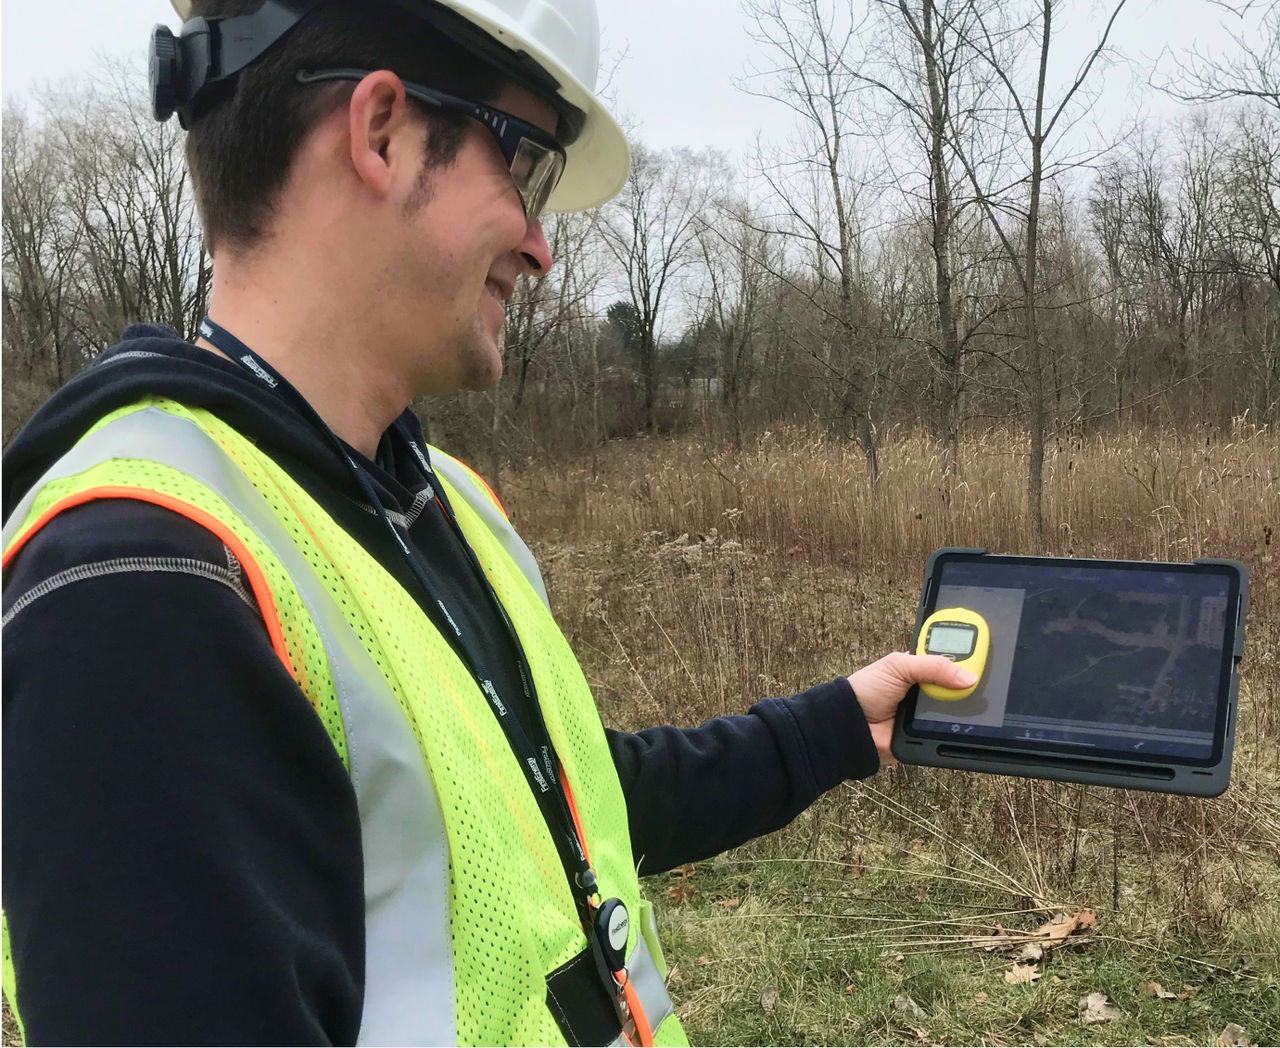 A First Energy employee wearing a yellow vest and white safety helmet, standing in a field holding an iPad